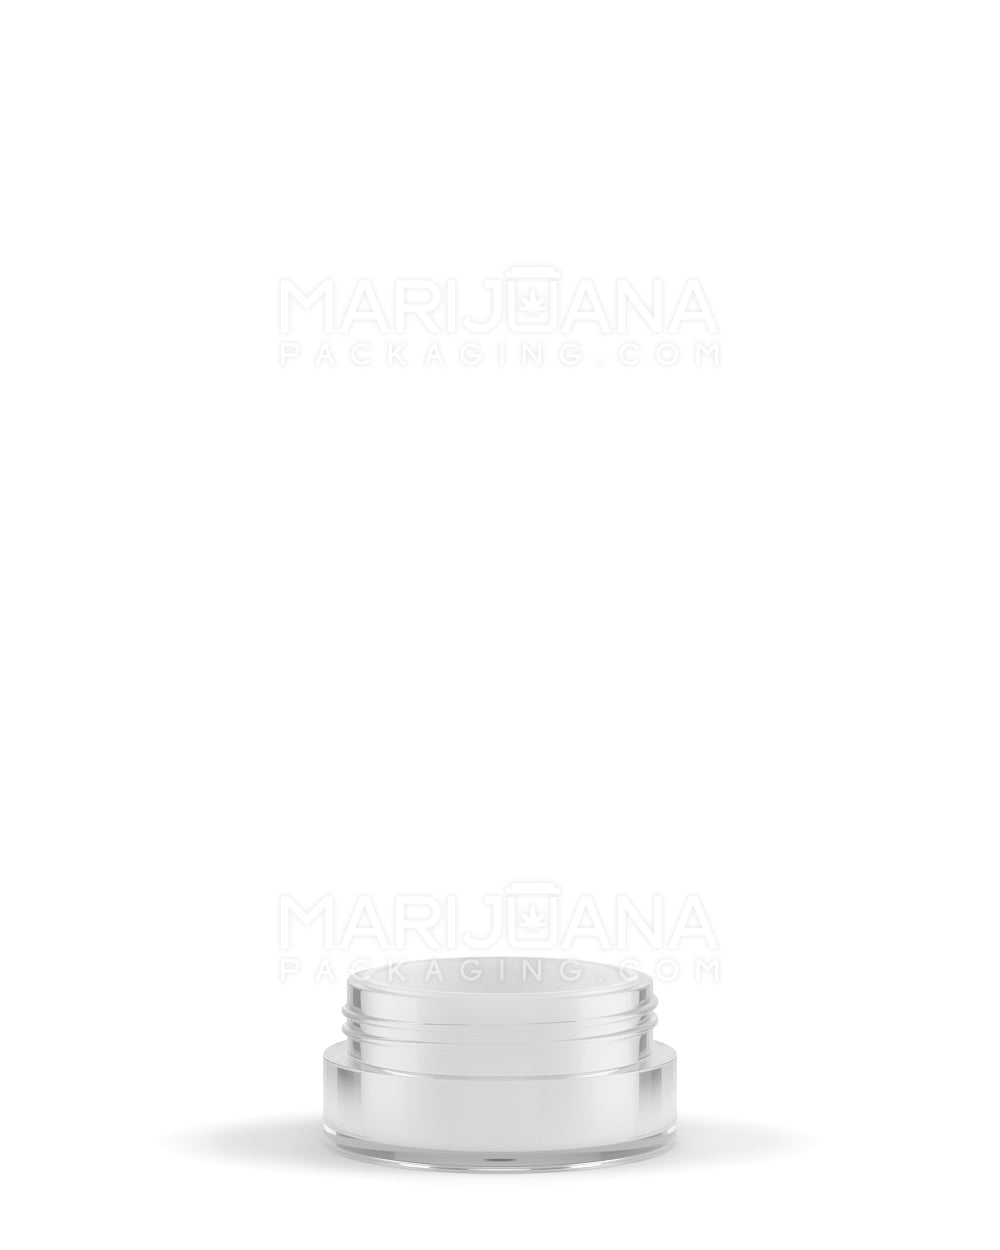 Clear Concentrate Containers w/ Screw Top Cap & White Silicone Insert | 5mL - Plastic - 100 Count - 6